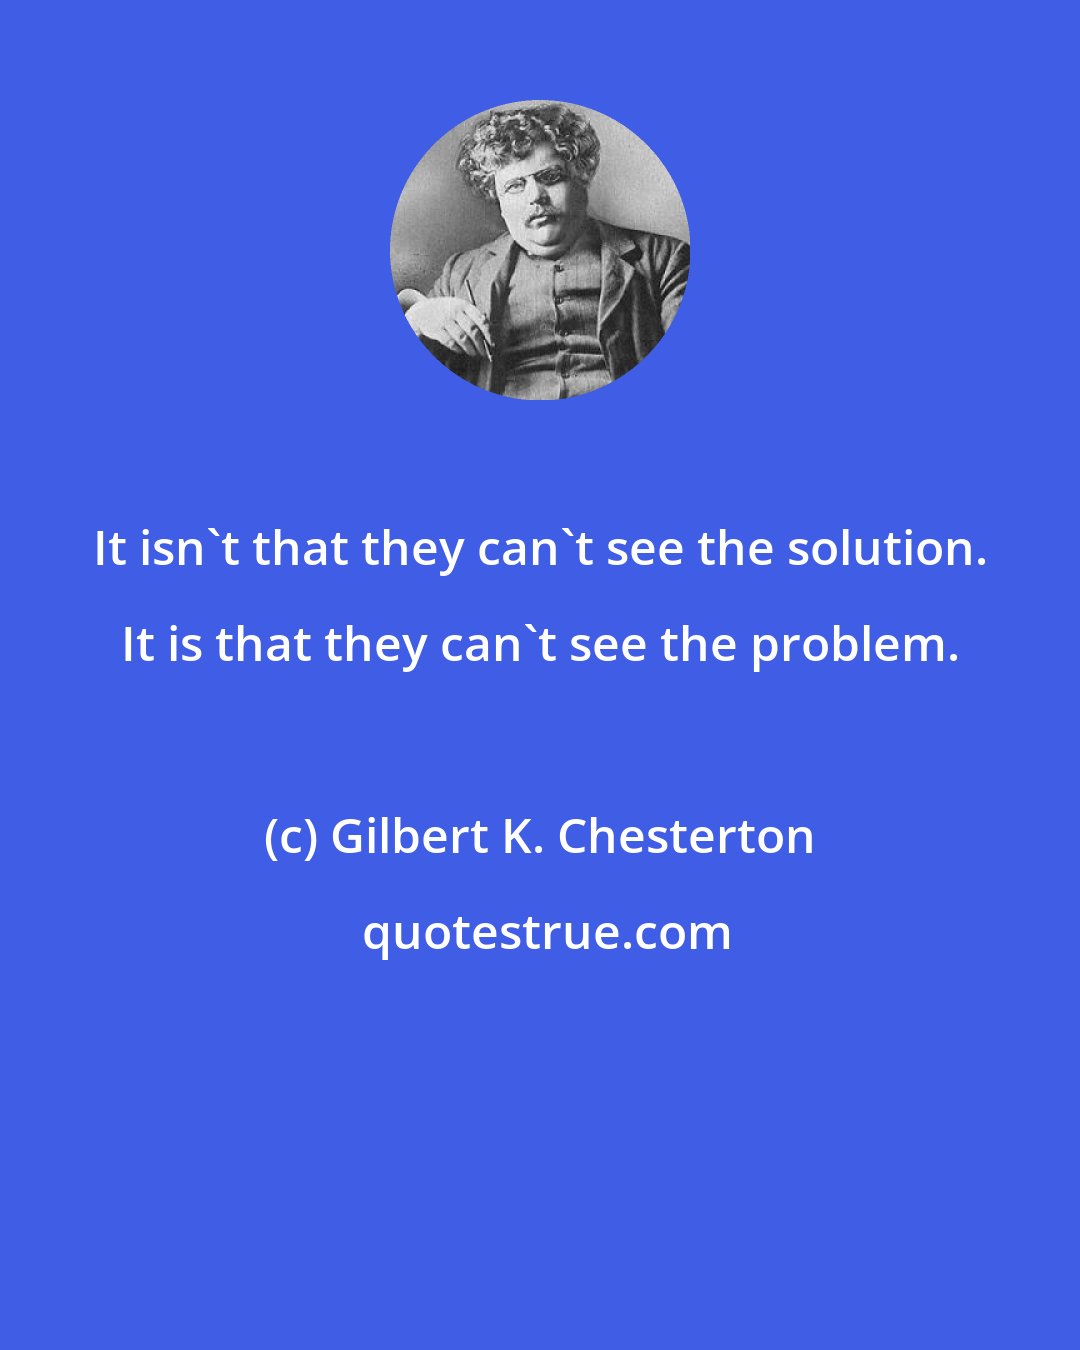 Gilbert K. Chesterton: It isn't that they can't see the solution. It is that they can't see the problem.